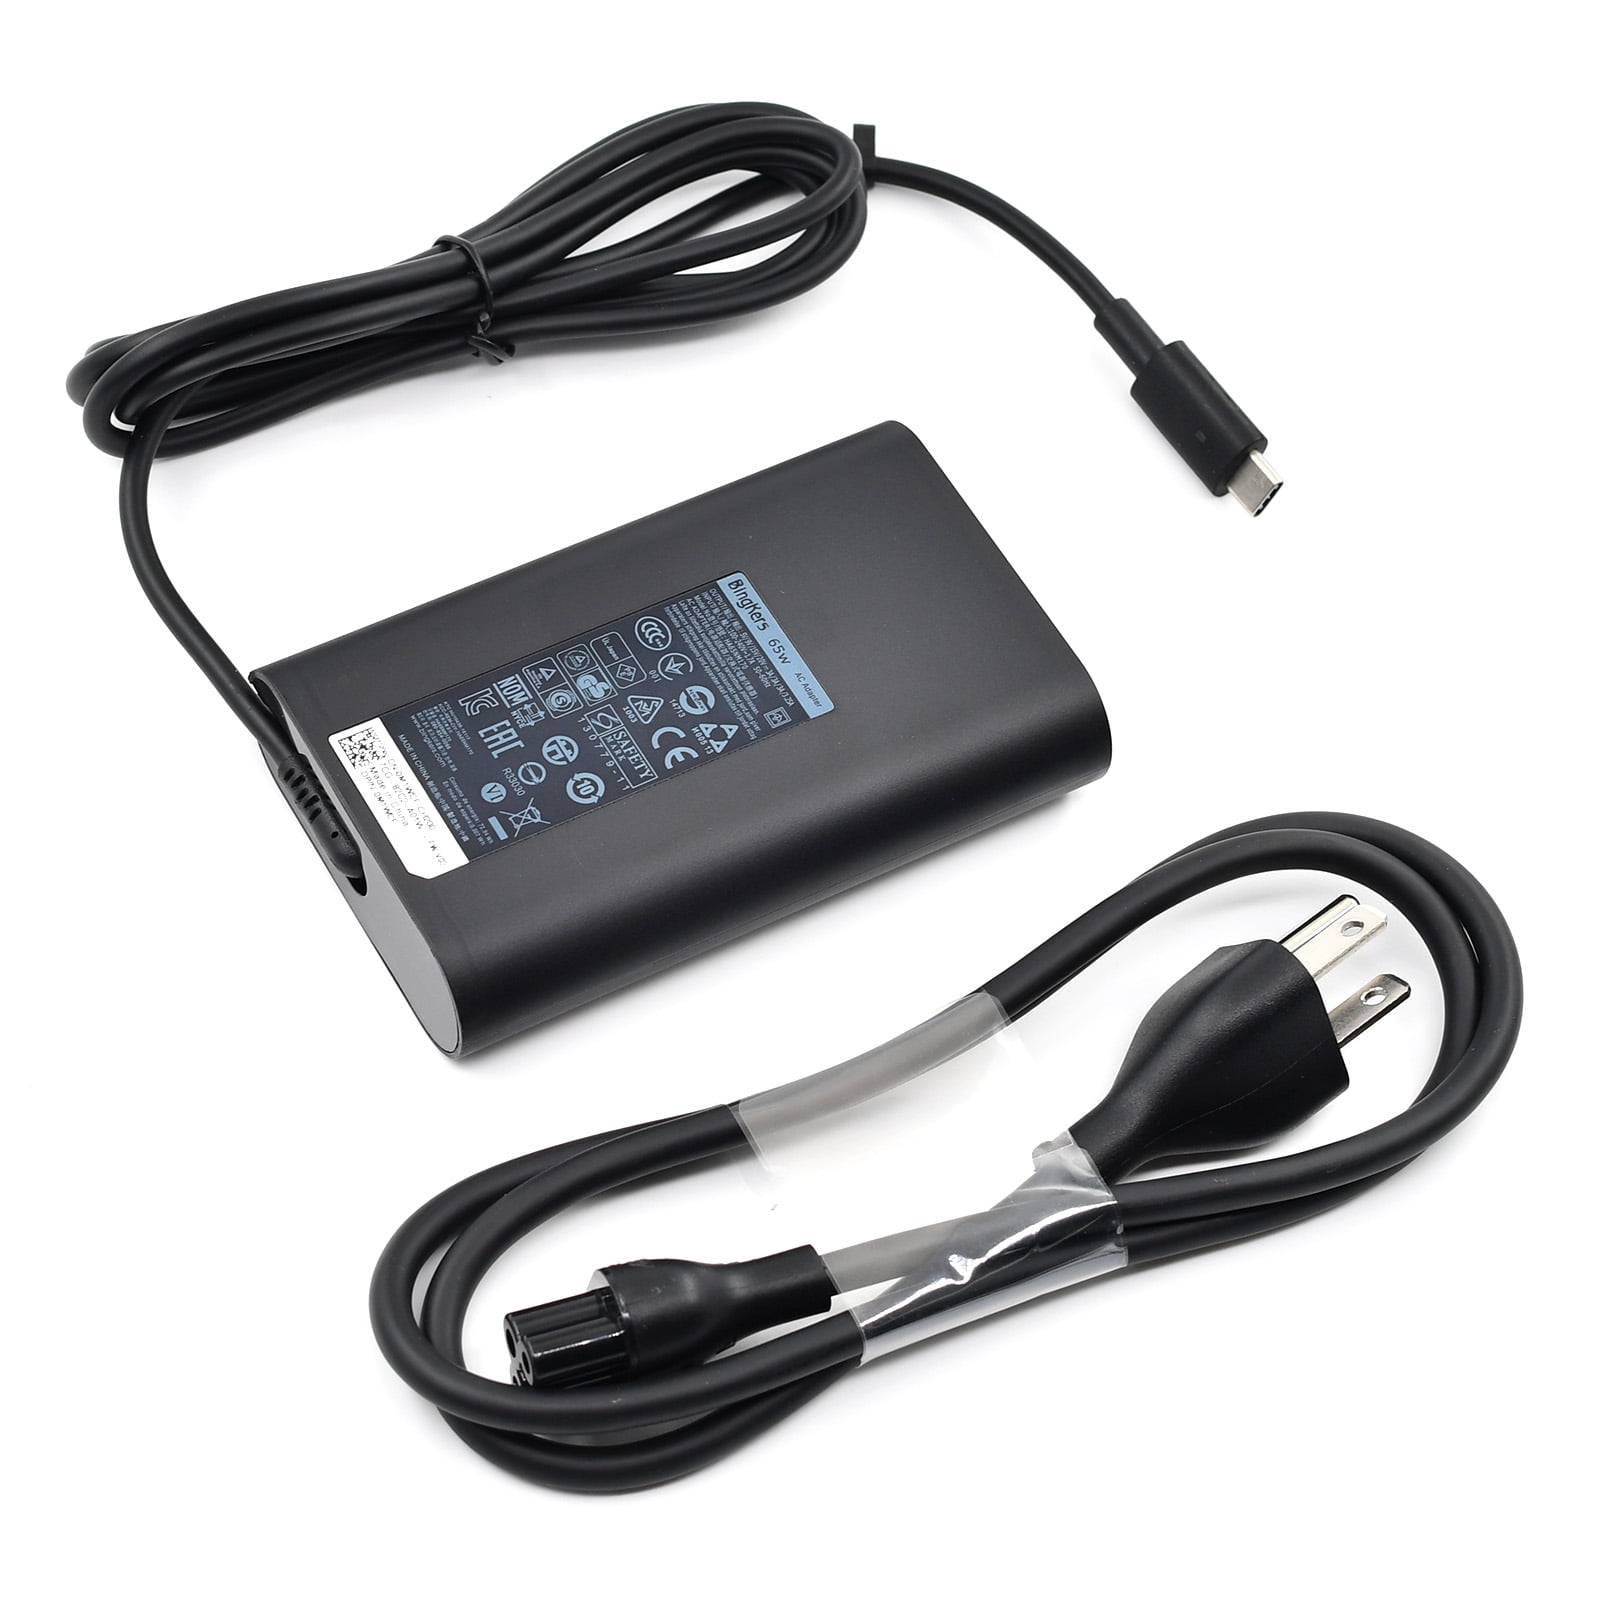 65W USB C Charger PA-1450-66D1 for Dell Latitude 12 5285 5289 5290 7212  7275 7285 7290, 